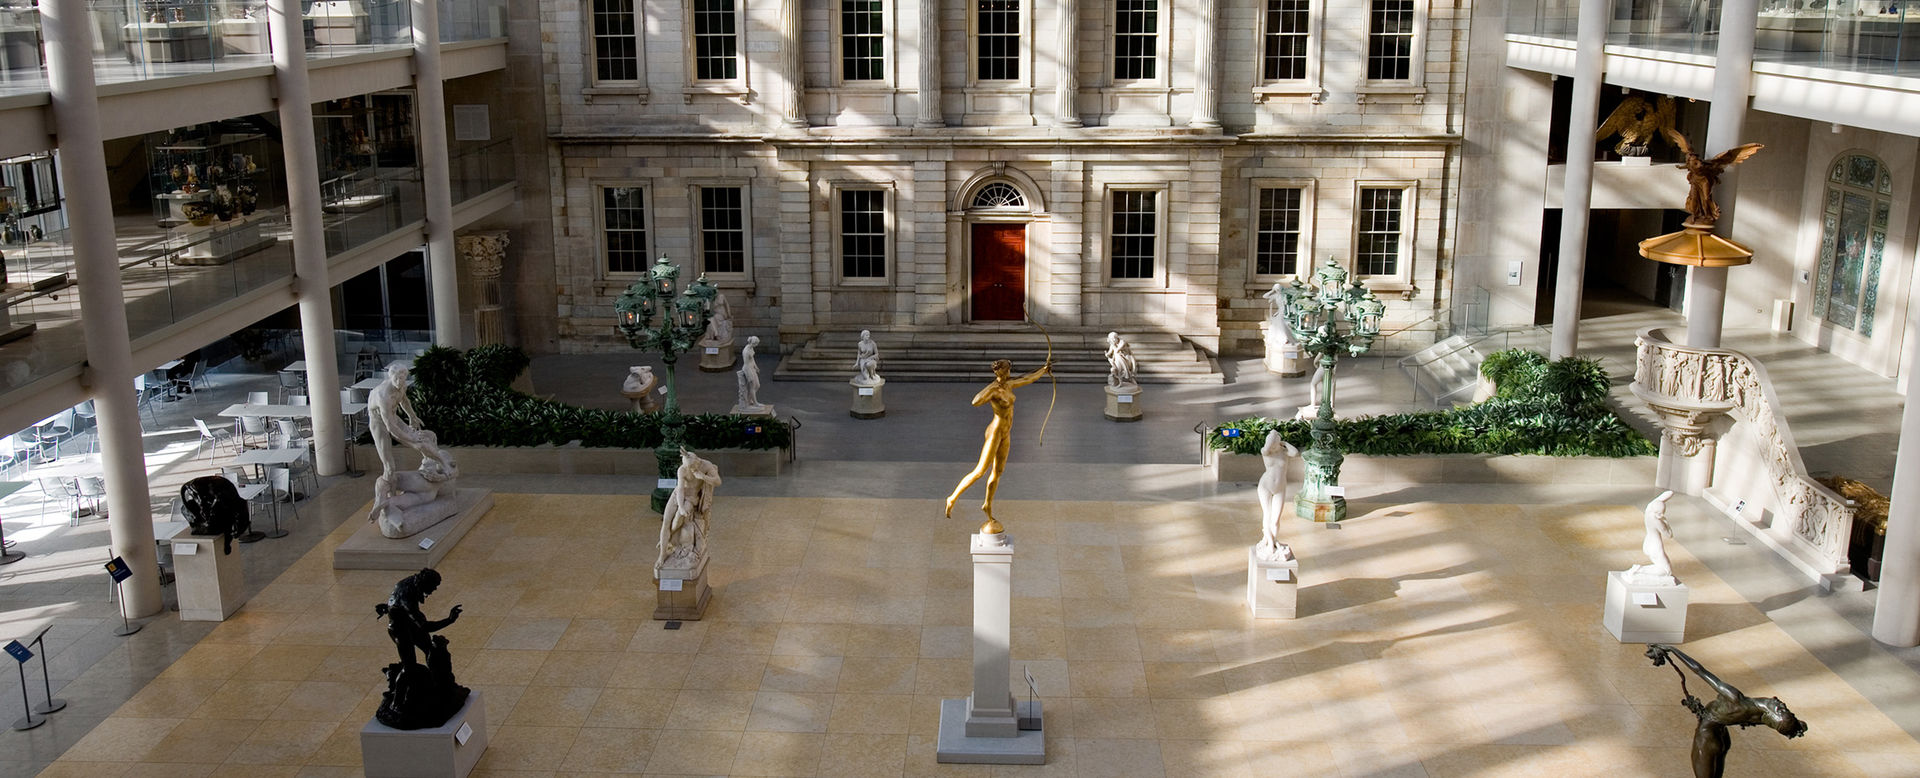 Several sculptures are exhibited throughout a large, open, indoor court